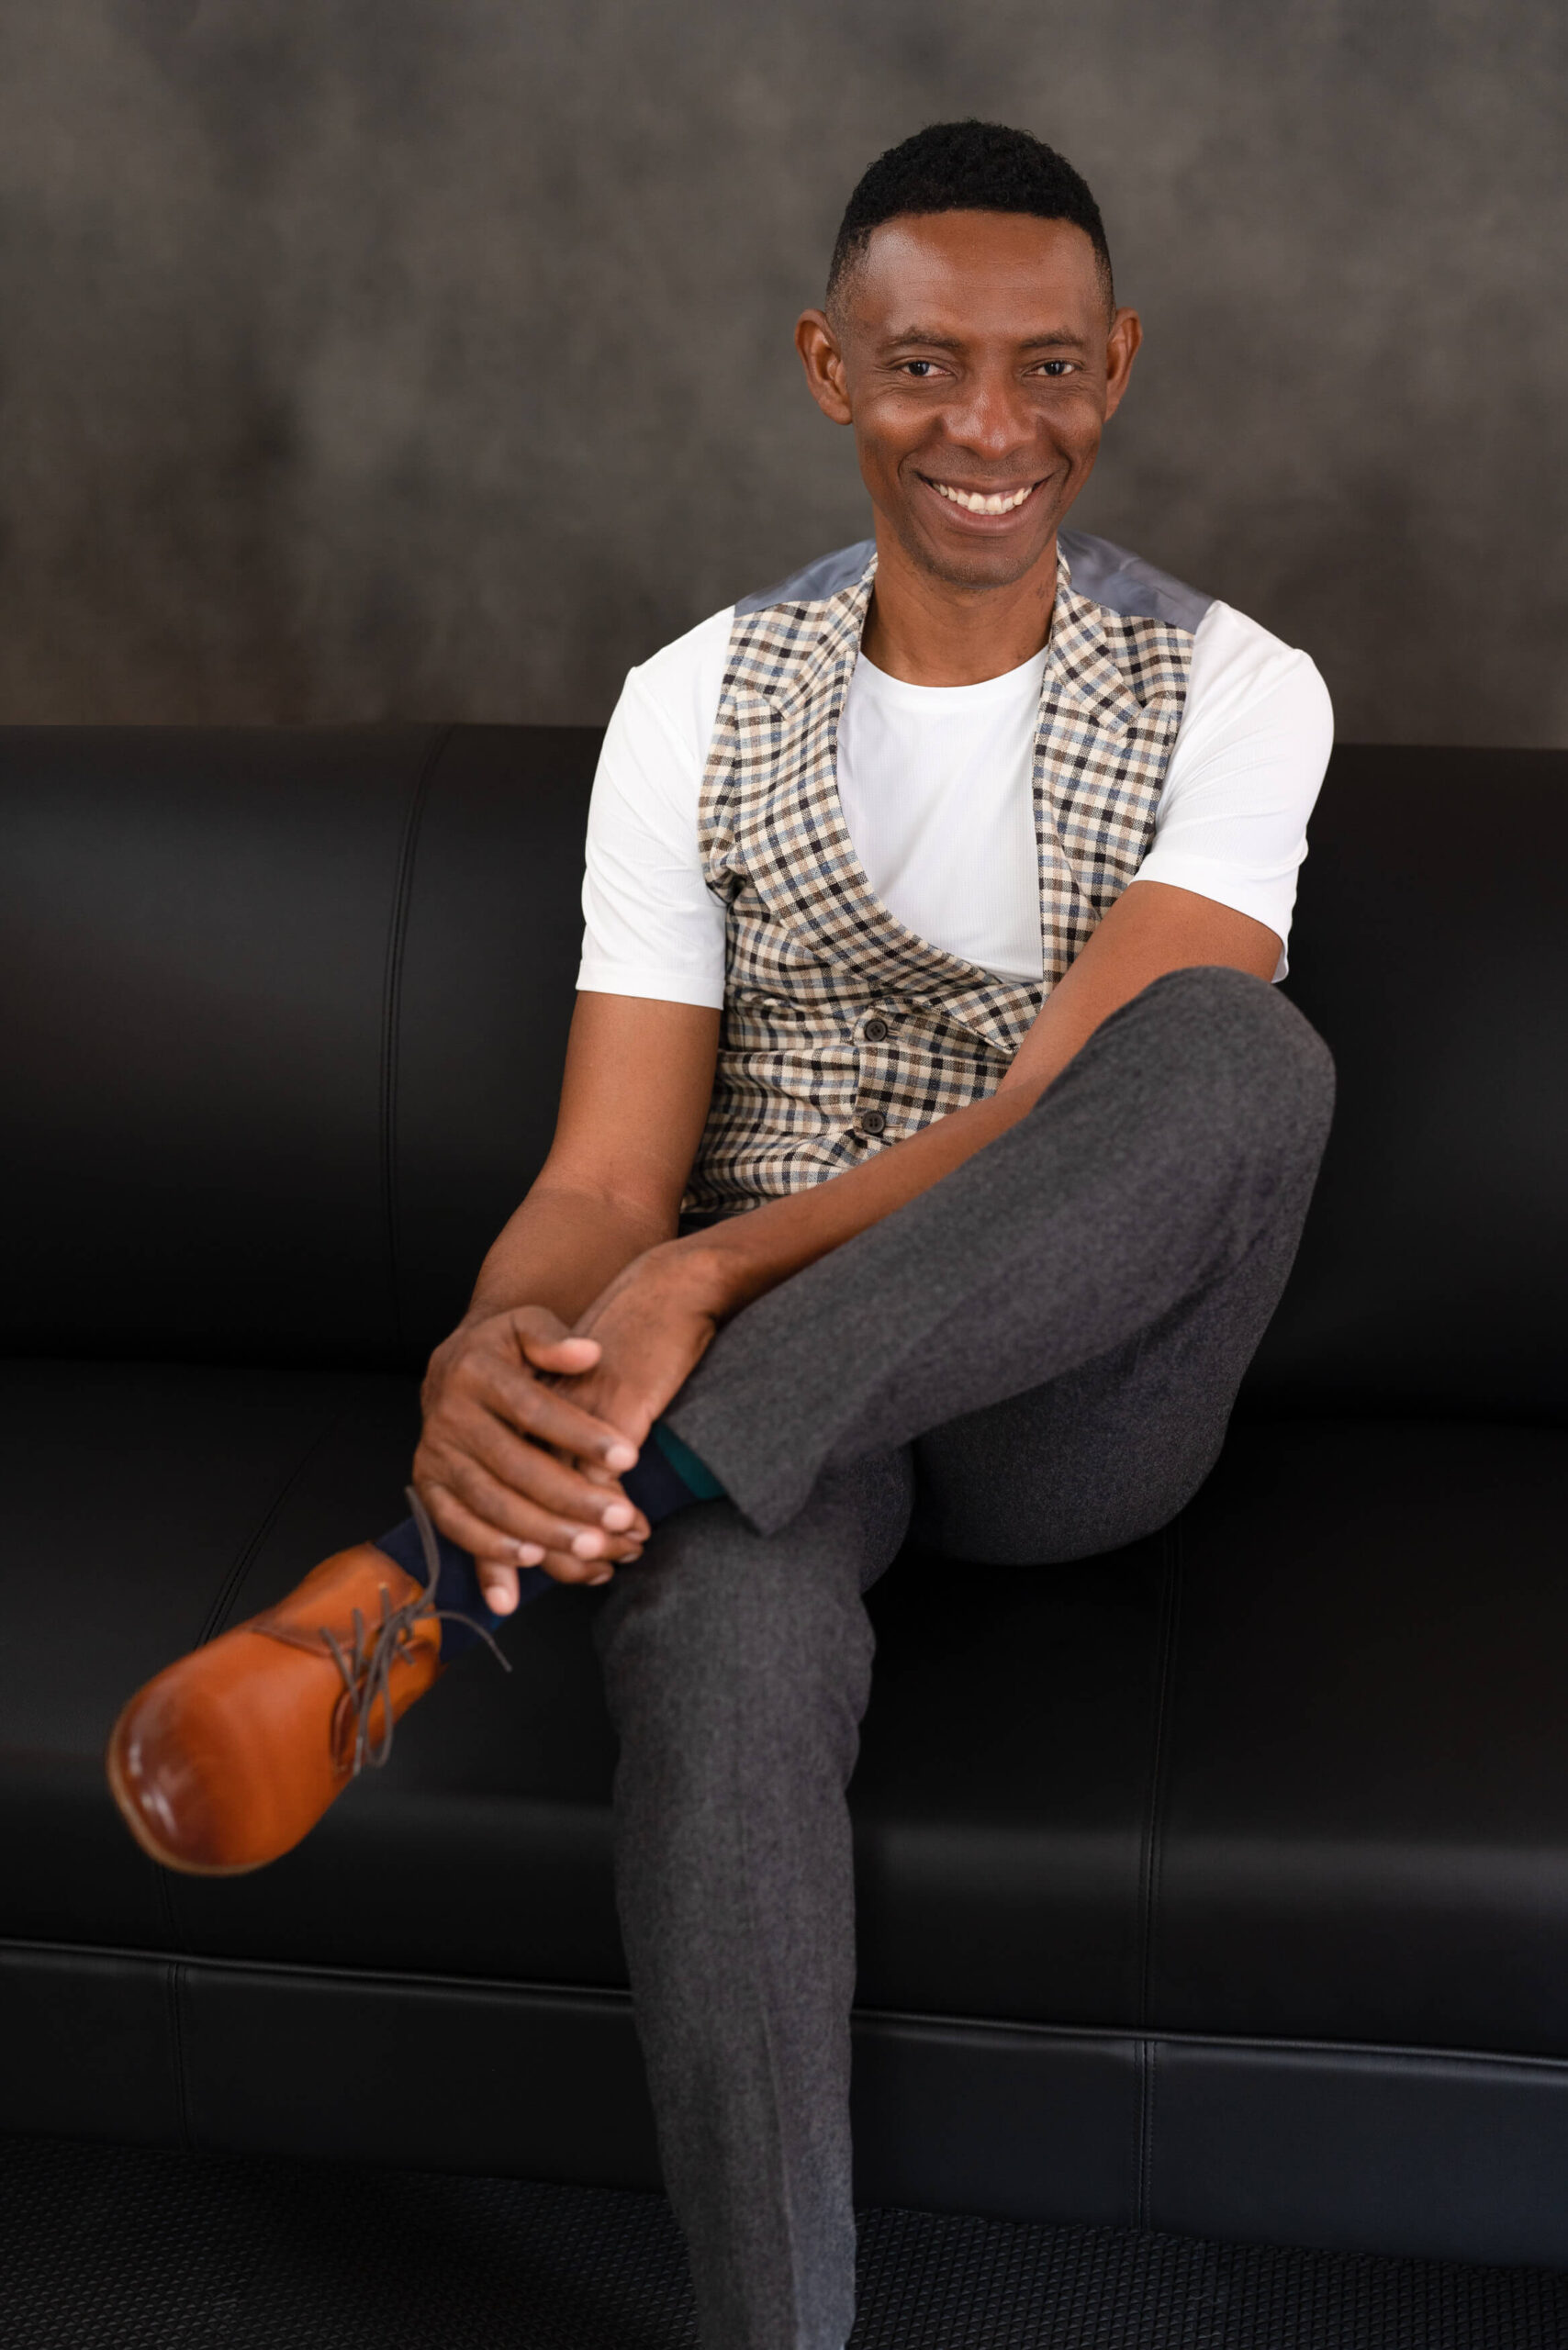 Smiling man getting a loma linda headshot, in fashionable vest and grey trousers seated on a black couch for a relaxed yet professional branding portrait, in a Loma Linda photography studio.